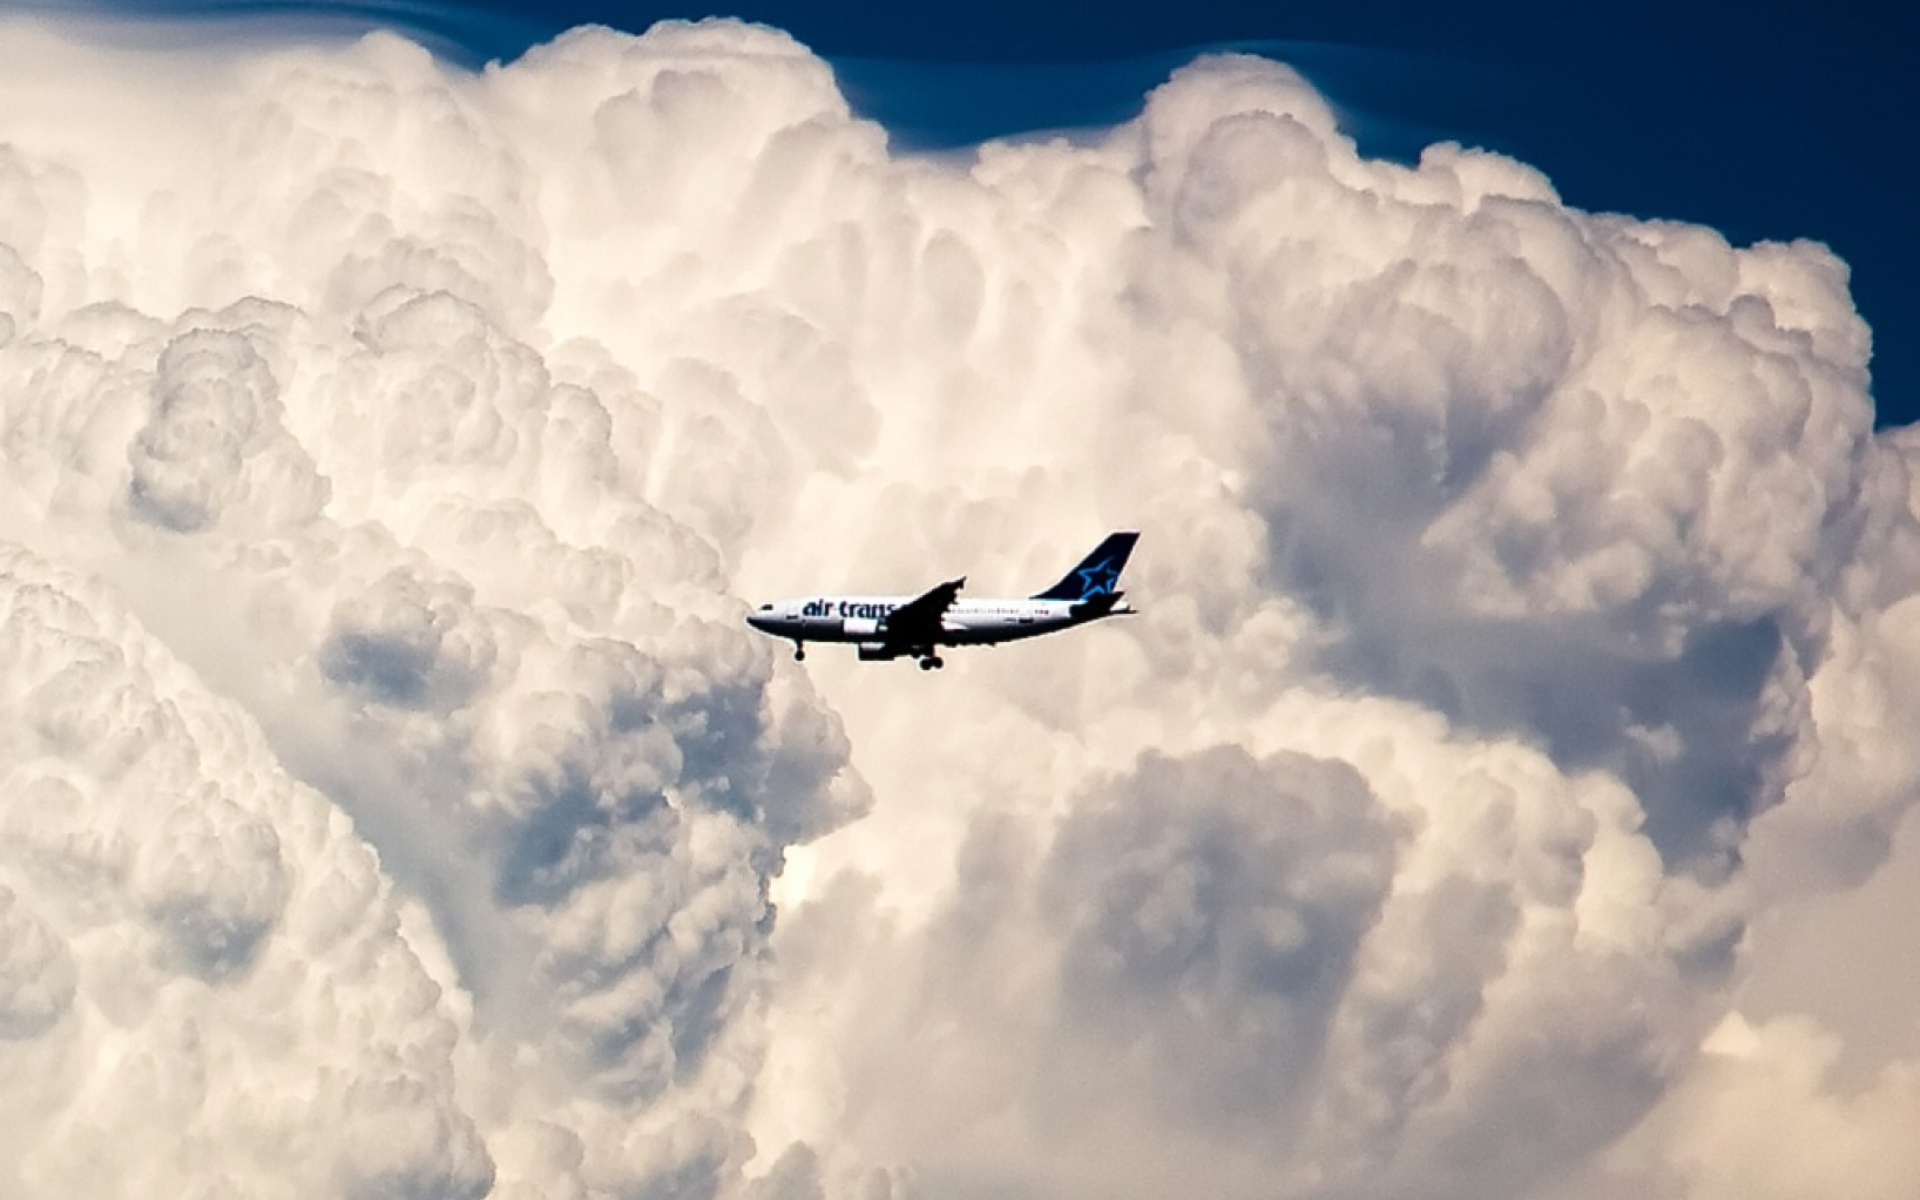 Plane In The Clouds wallpaper 1920x1200